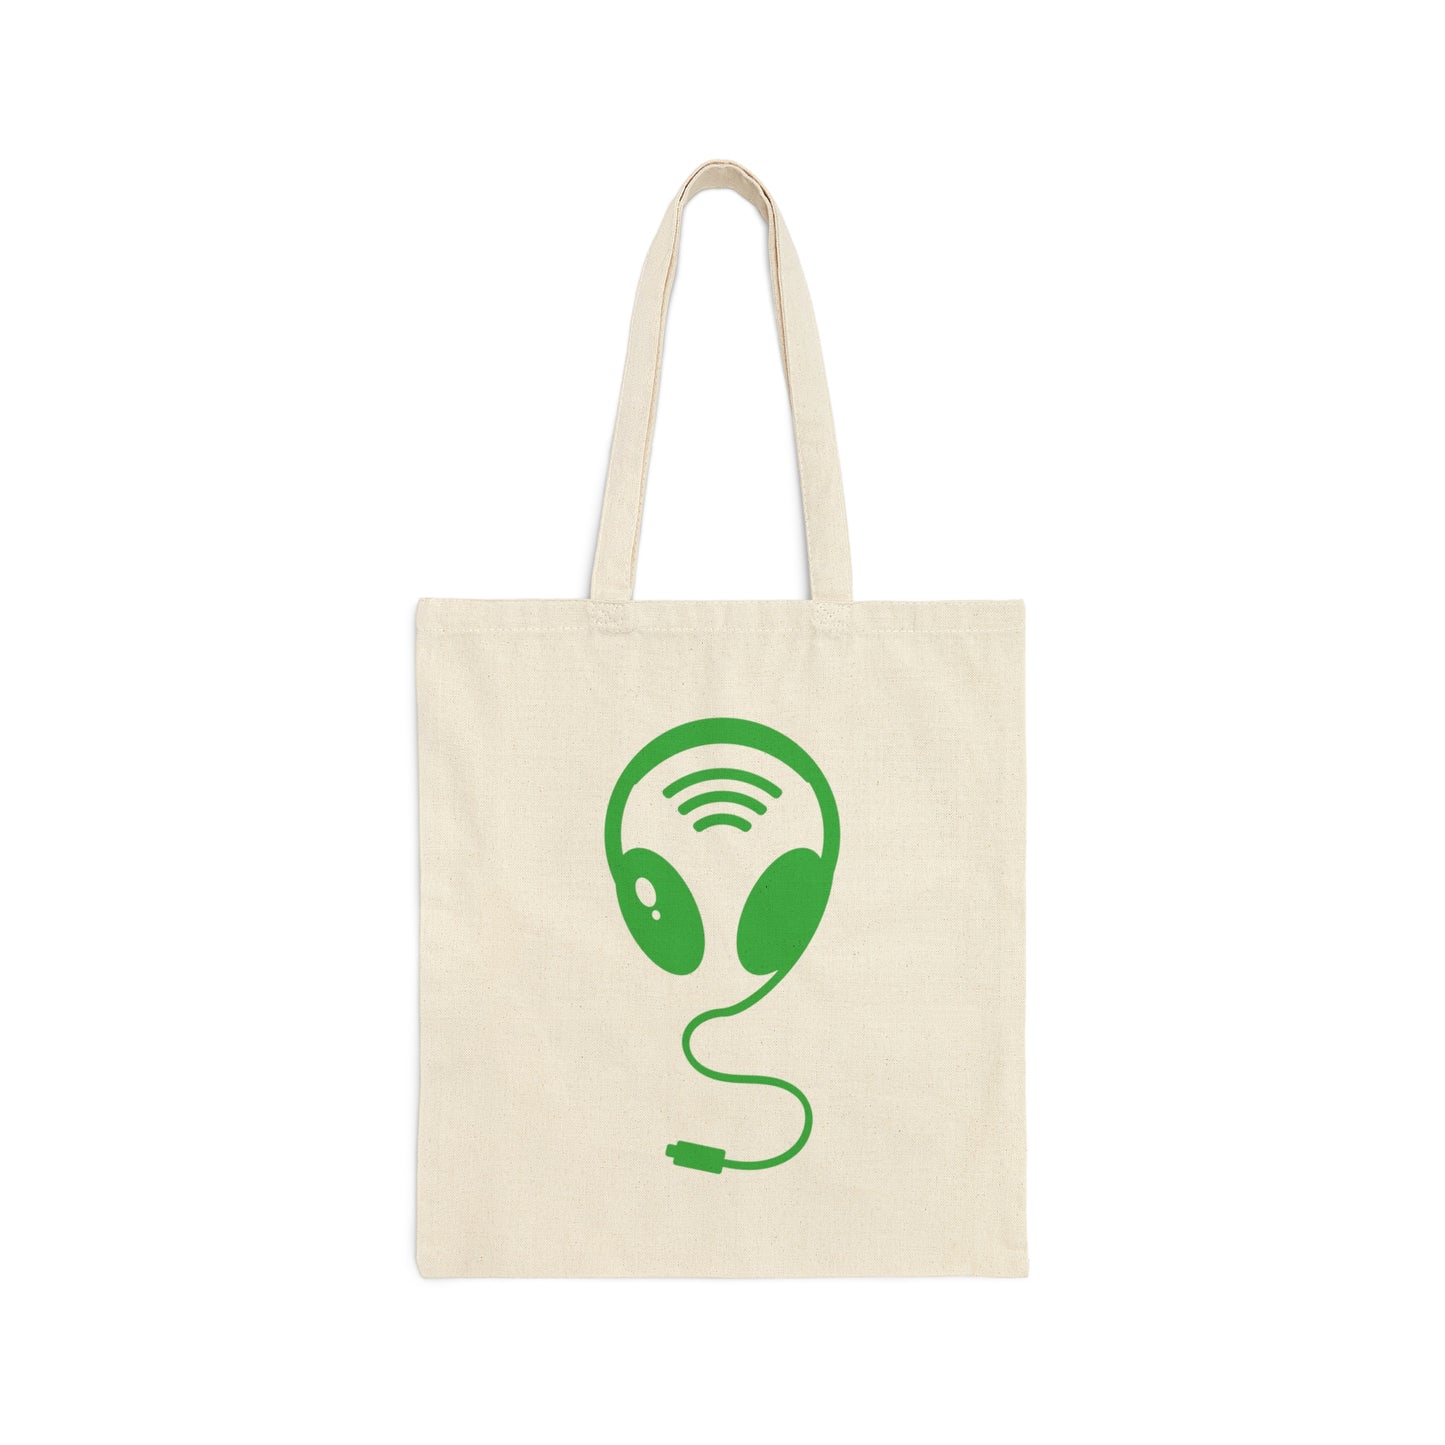 Aliens Headphones Humor Saying Quotes Canvas Shopping Cotton Tote Bag